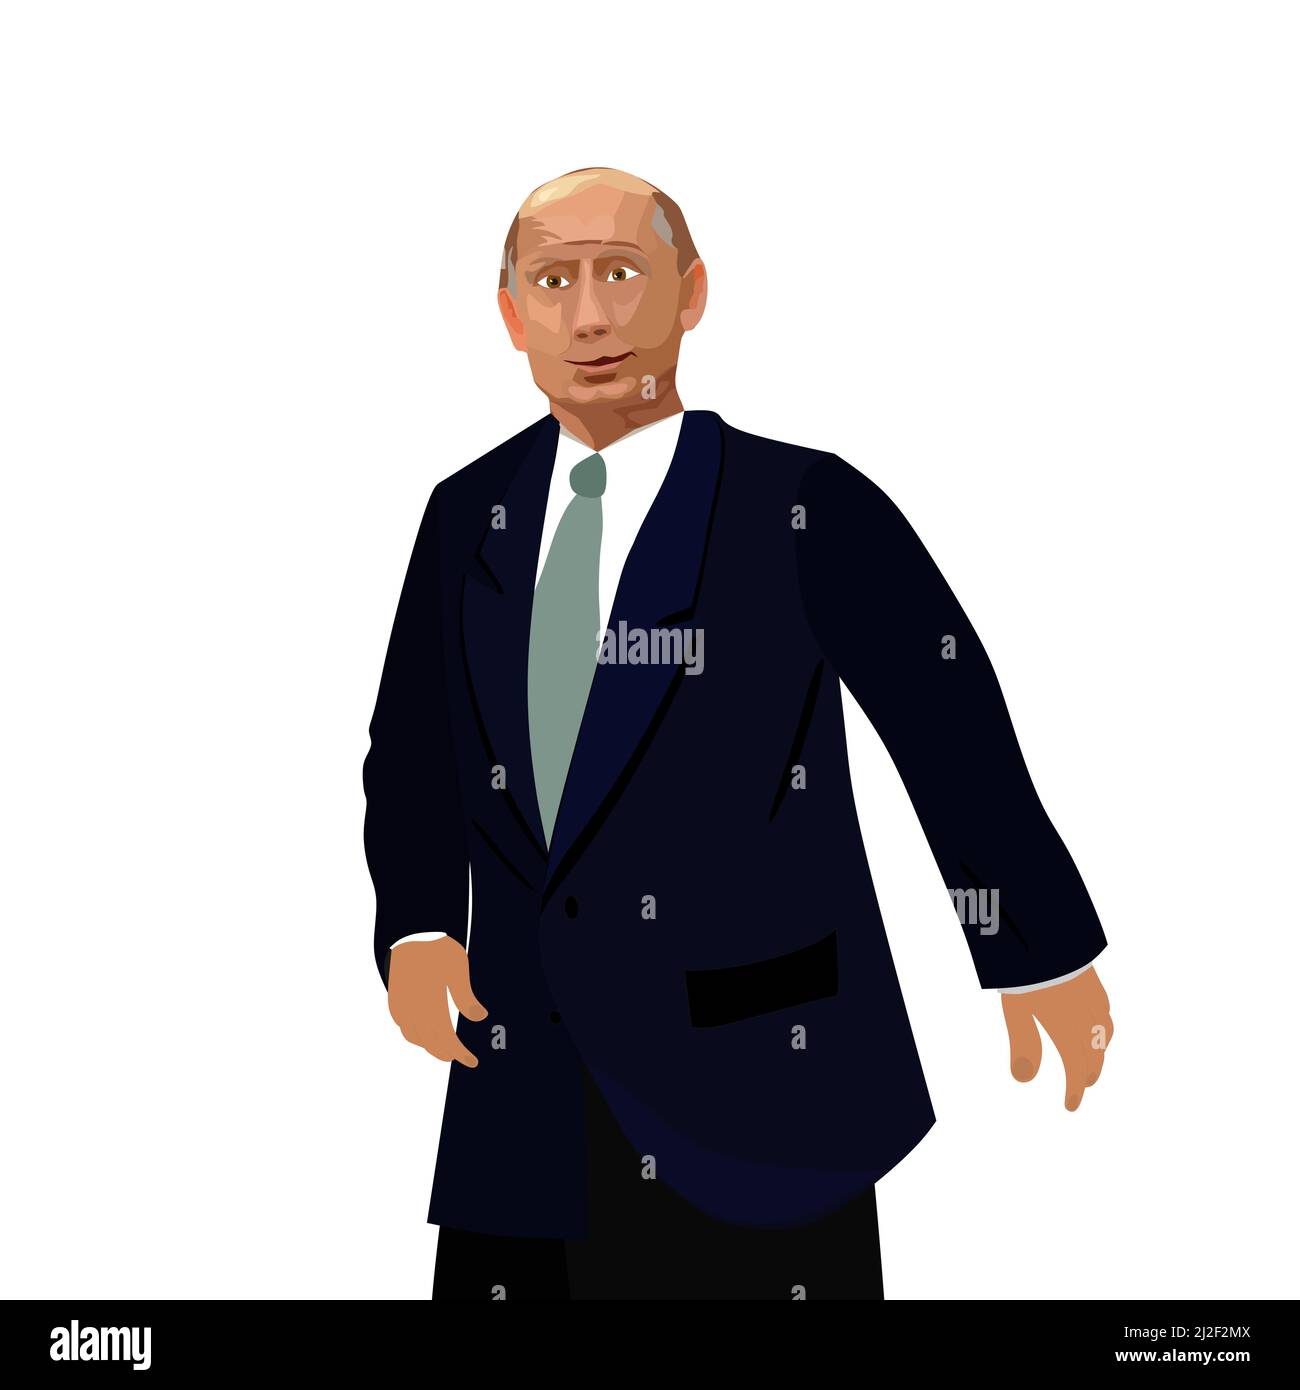 Vladimir Putin, dressed in a dark blue suit, white shirt and turquoise tie, walks forward with a slight smile on his face. Cheerful, contented, purpos Stock Vector